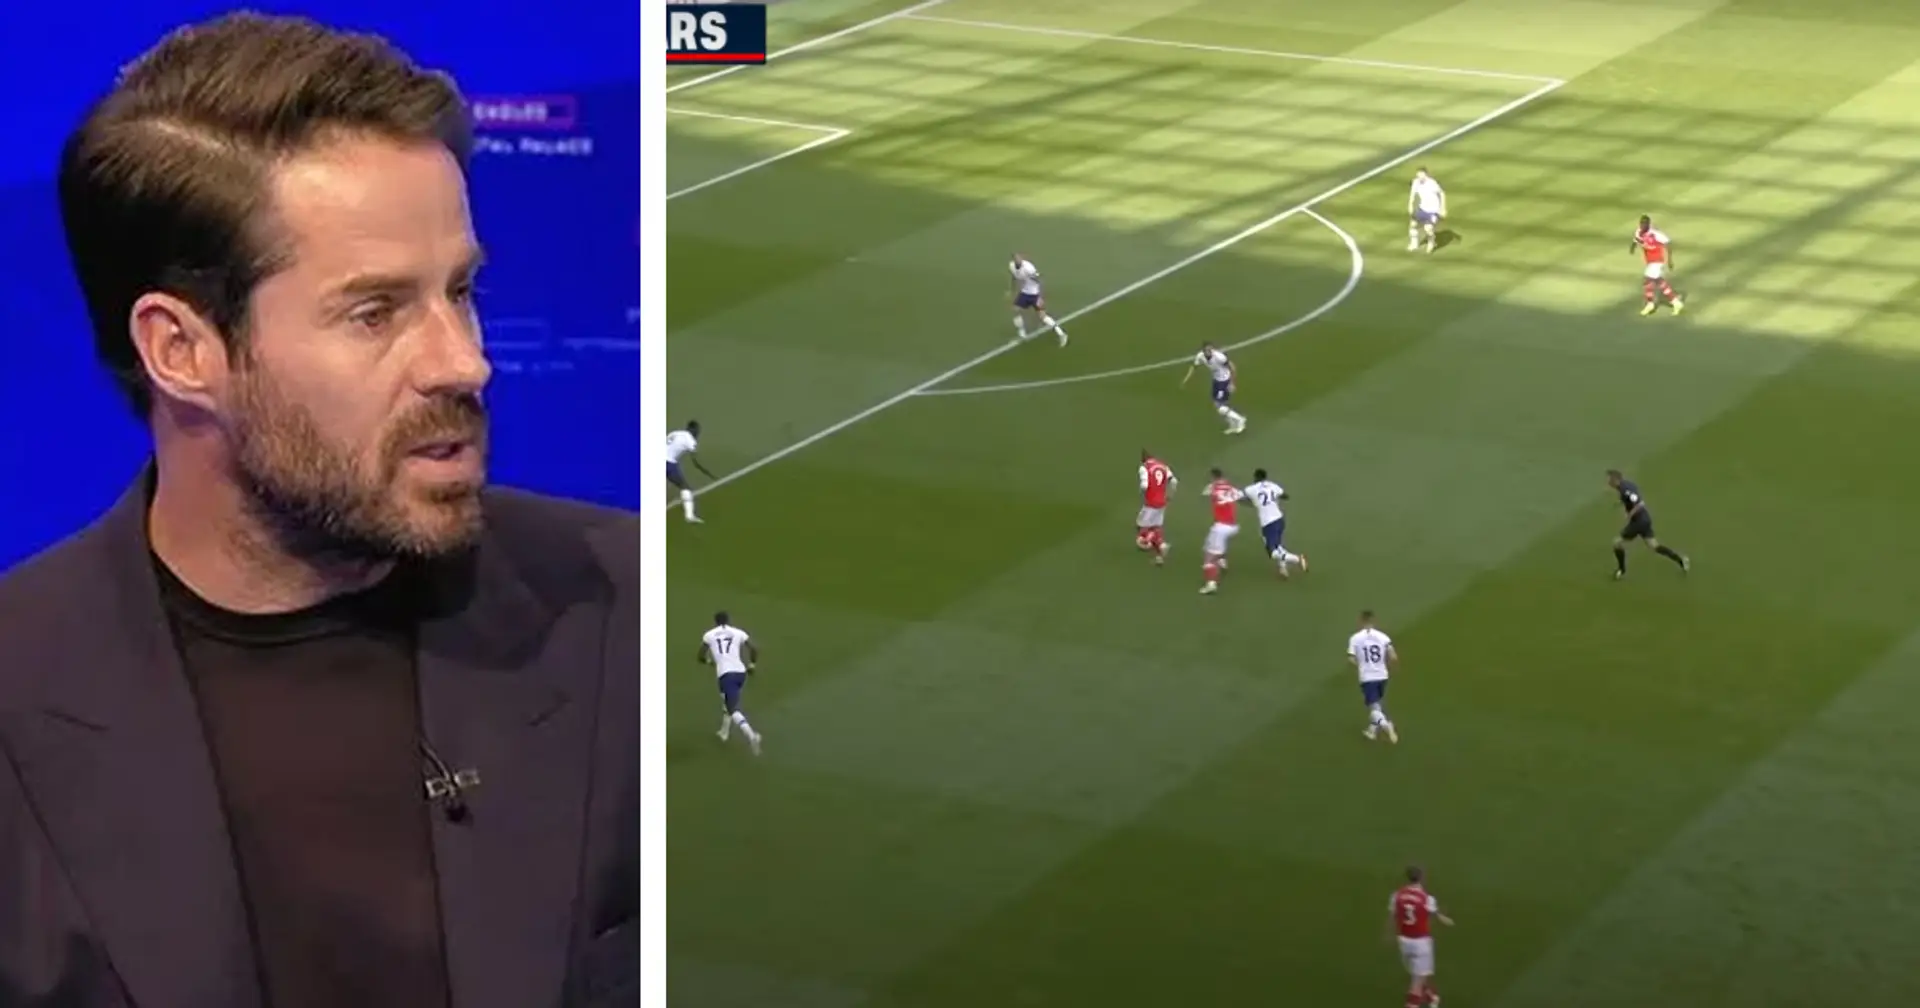 Jamie Redknapp pinpoints Xhaka's clever move to give Lacazette time and space to fire opener